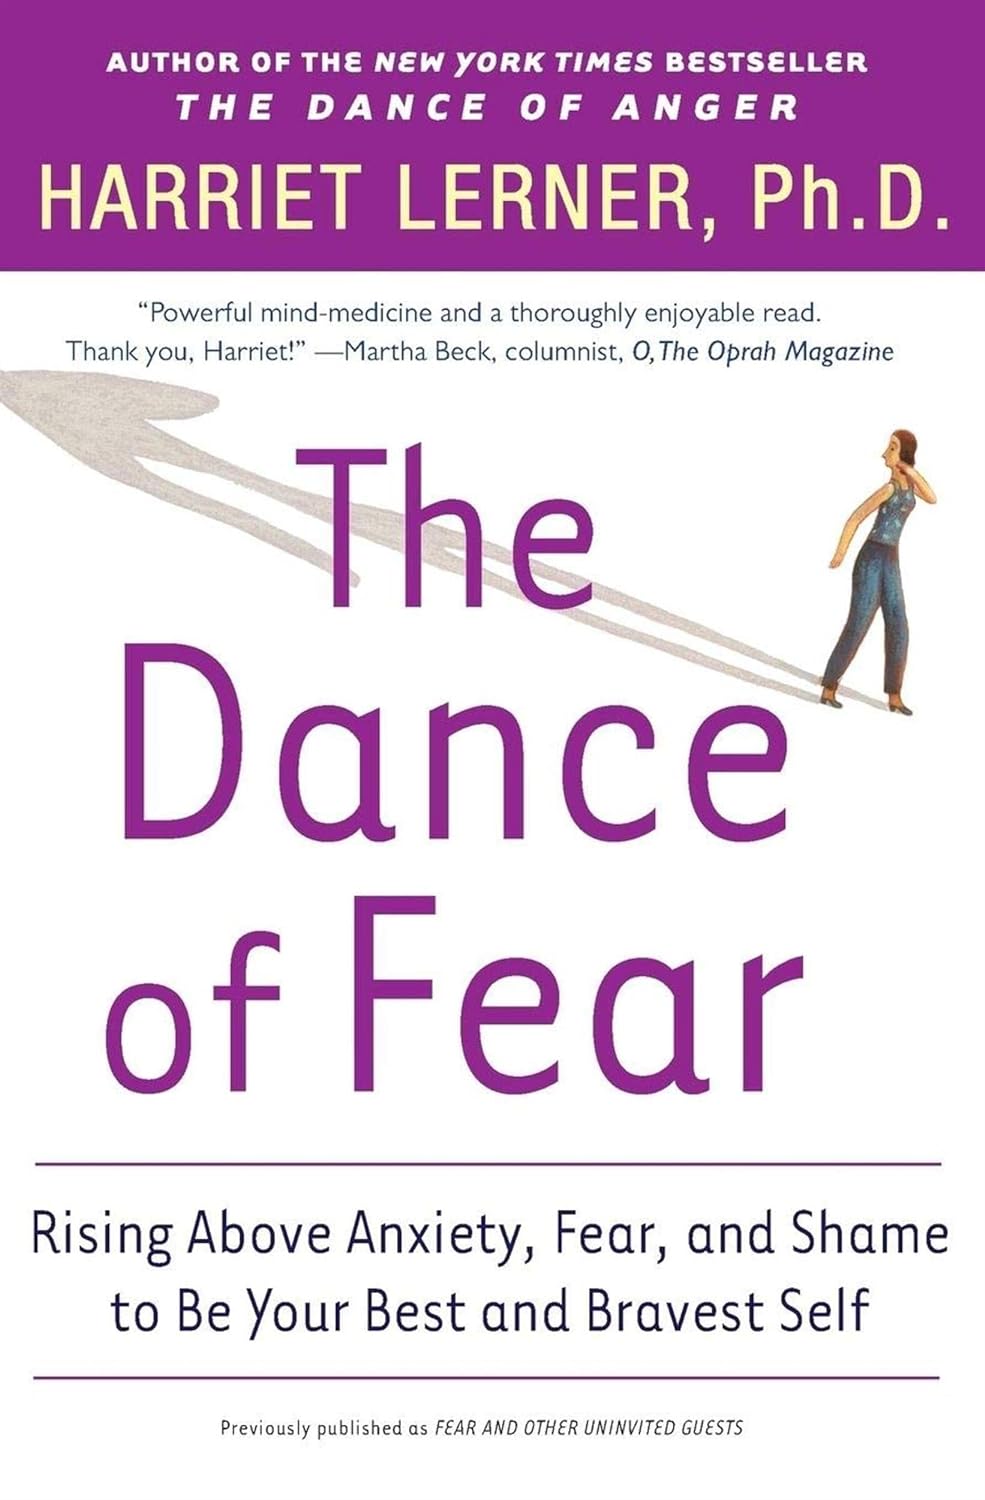 Book Cover - The Dance of Fear by Harriet Lerner